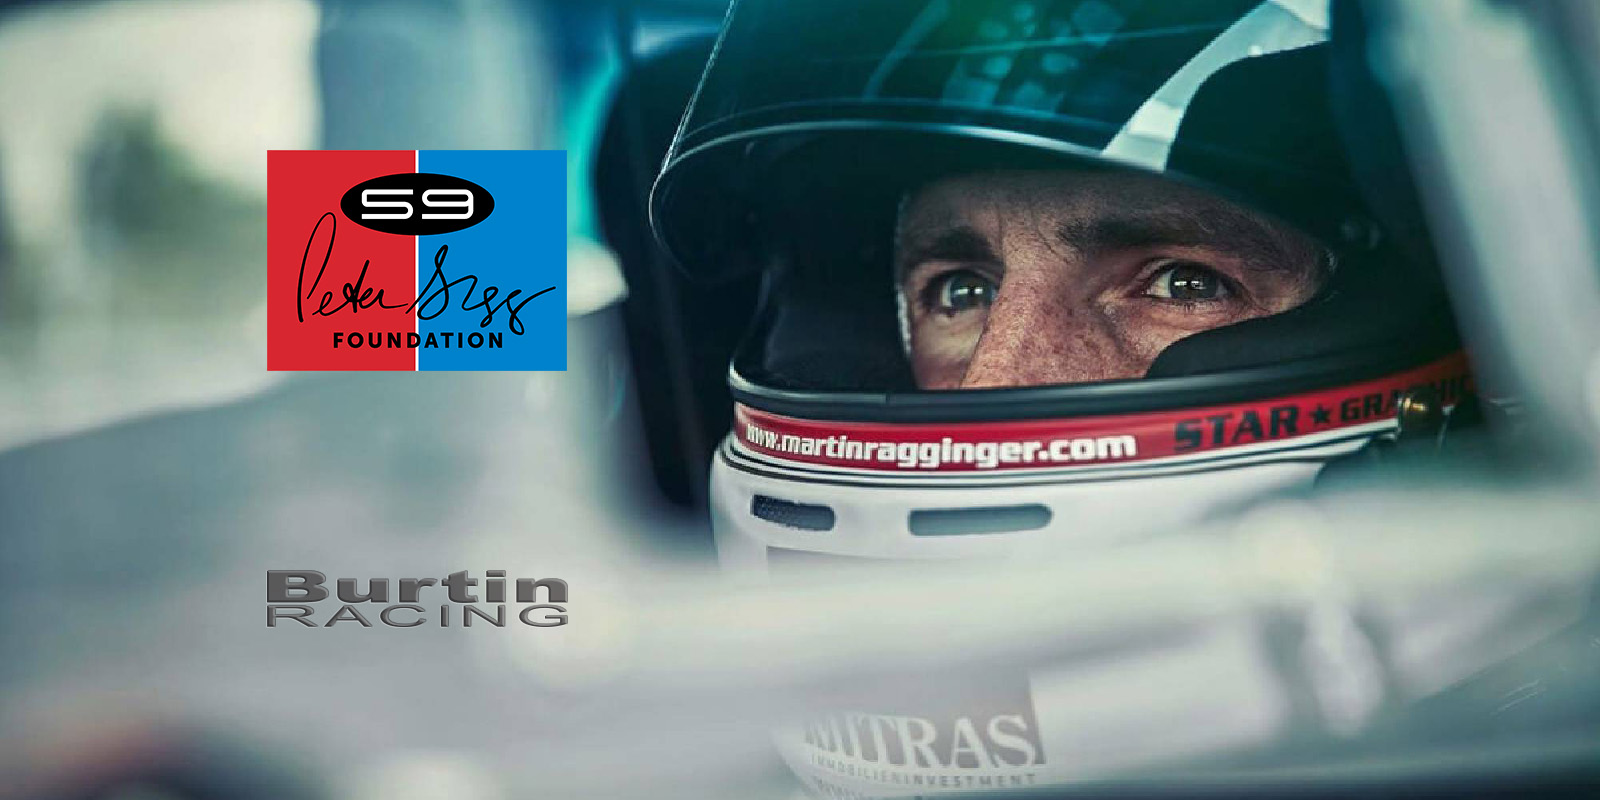 Martin Ragginer Returns to Trans Am for The Peter Gregg Foundation and Burtin Racing